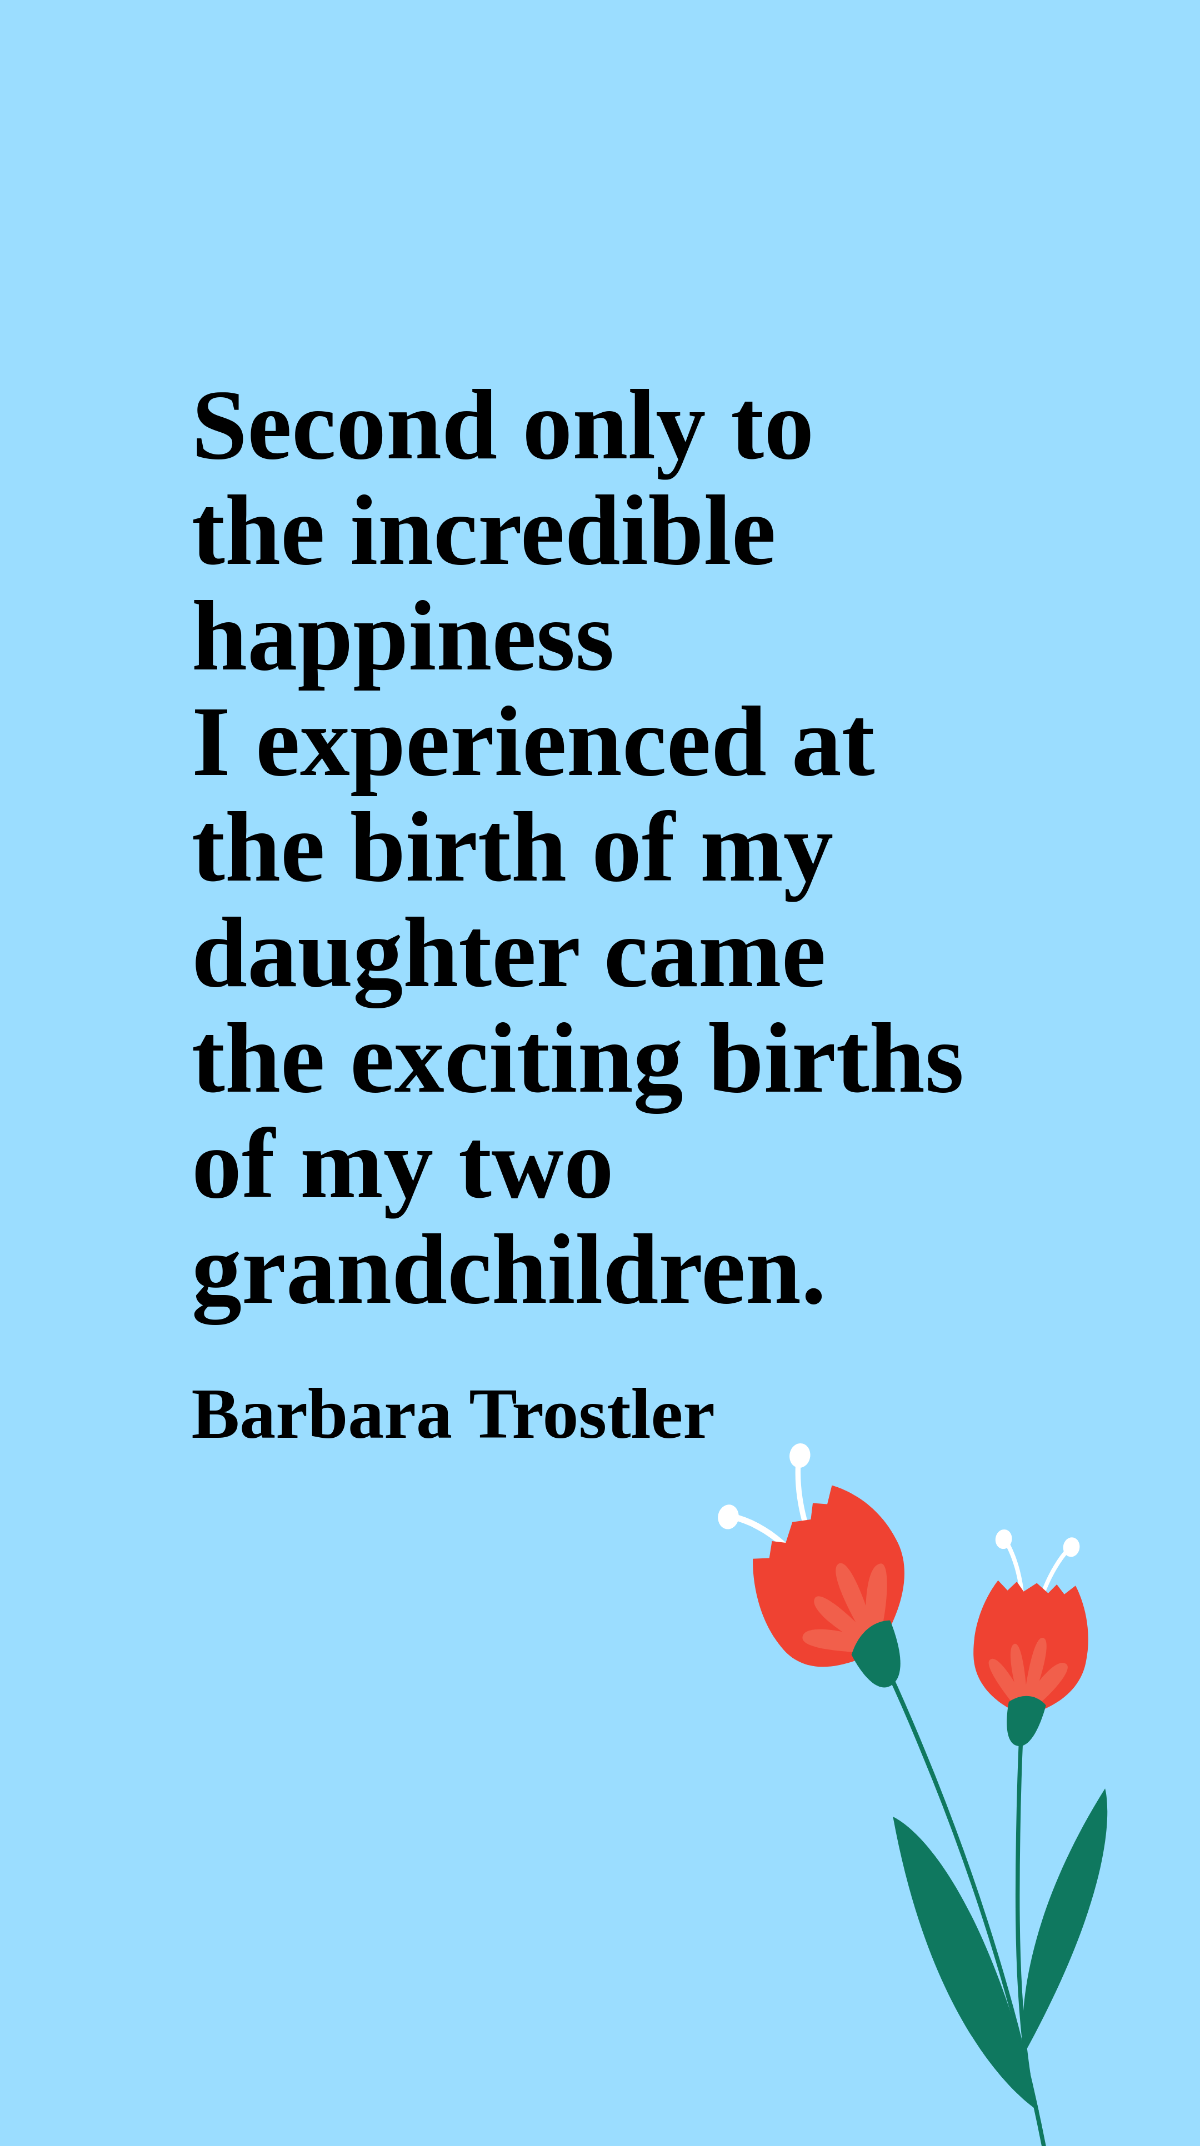 Barbara Trostler - Second only to the incredible happiness I experienced at the birth of my daughter came the exciting births of my two grandchildren. Template